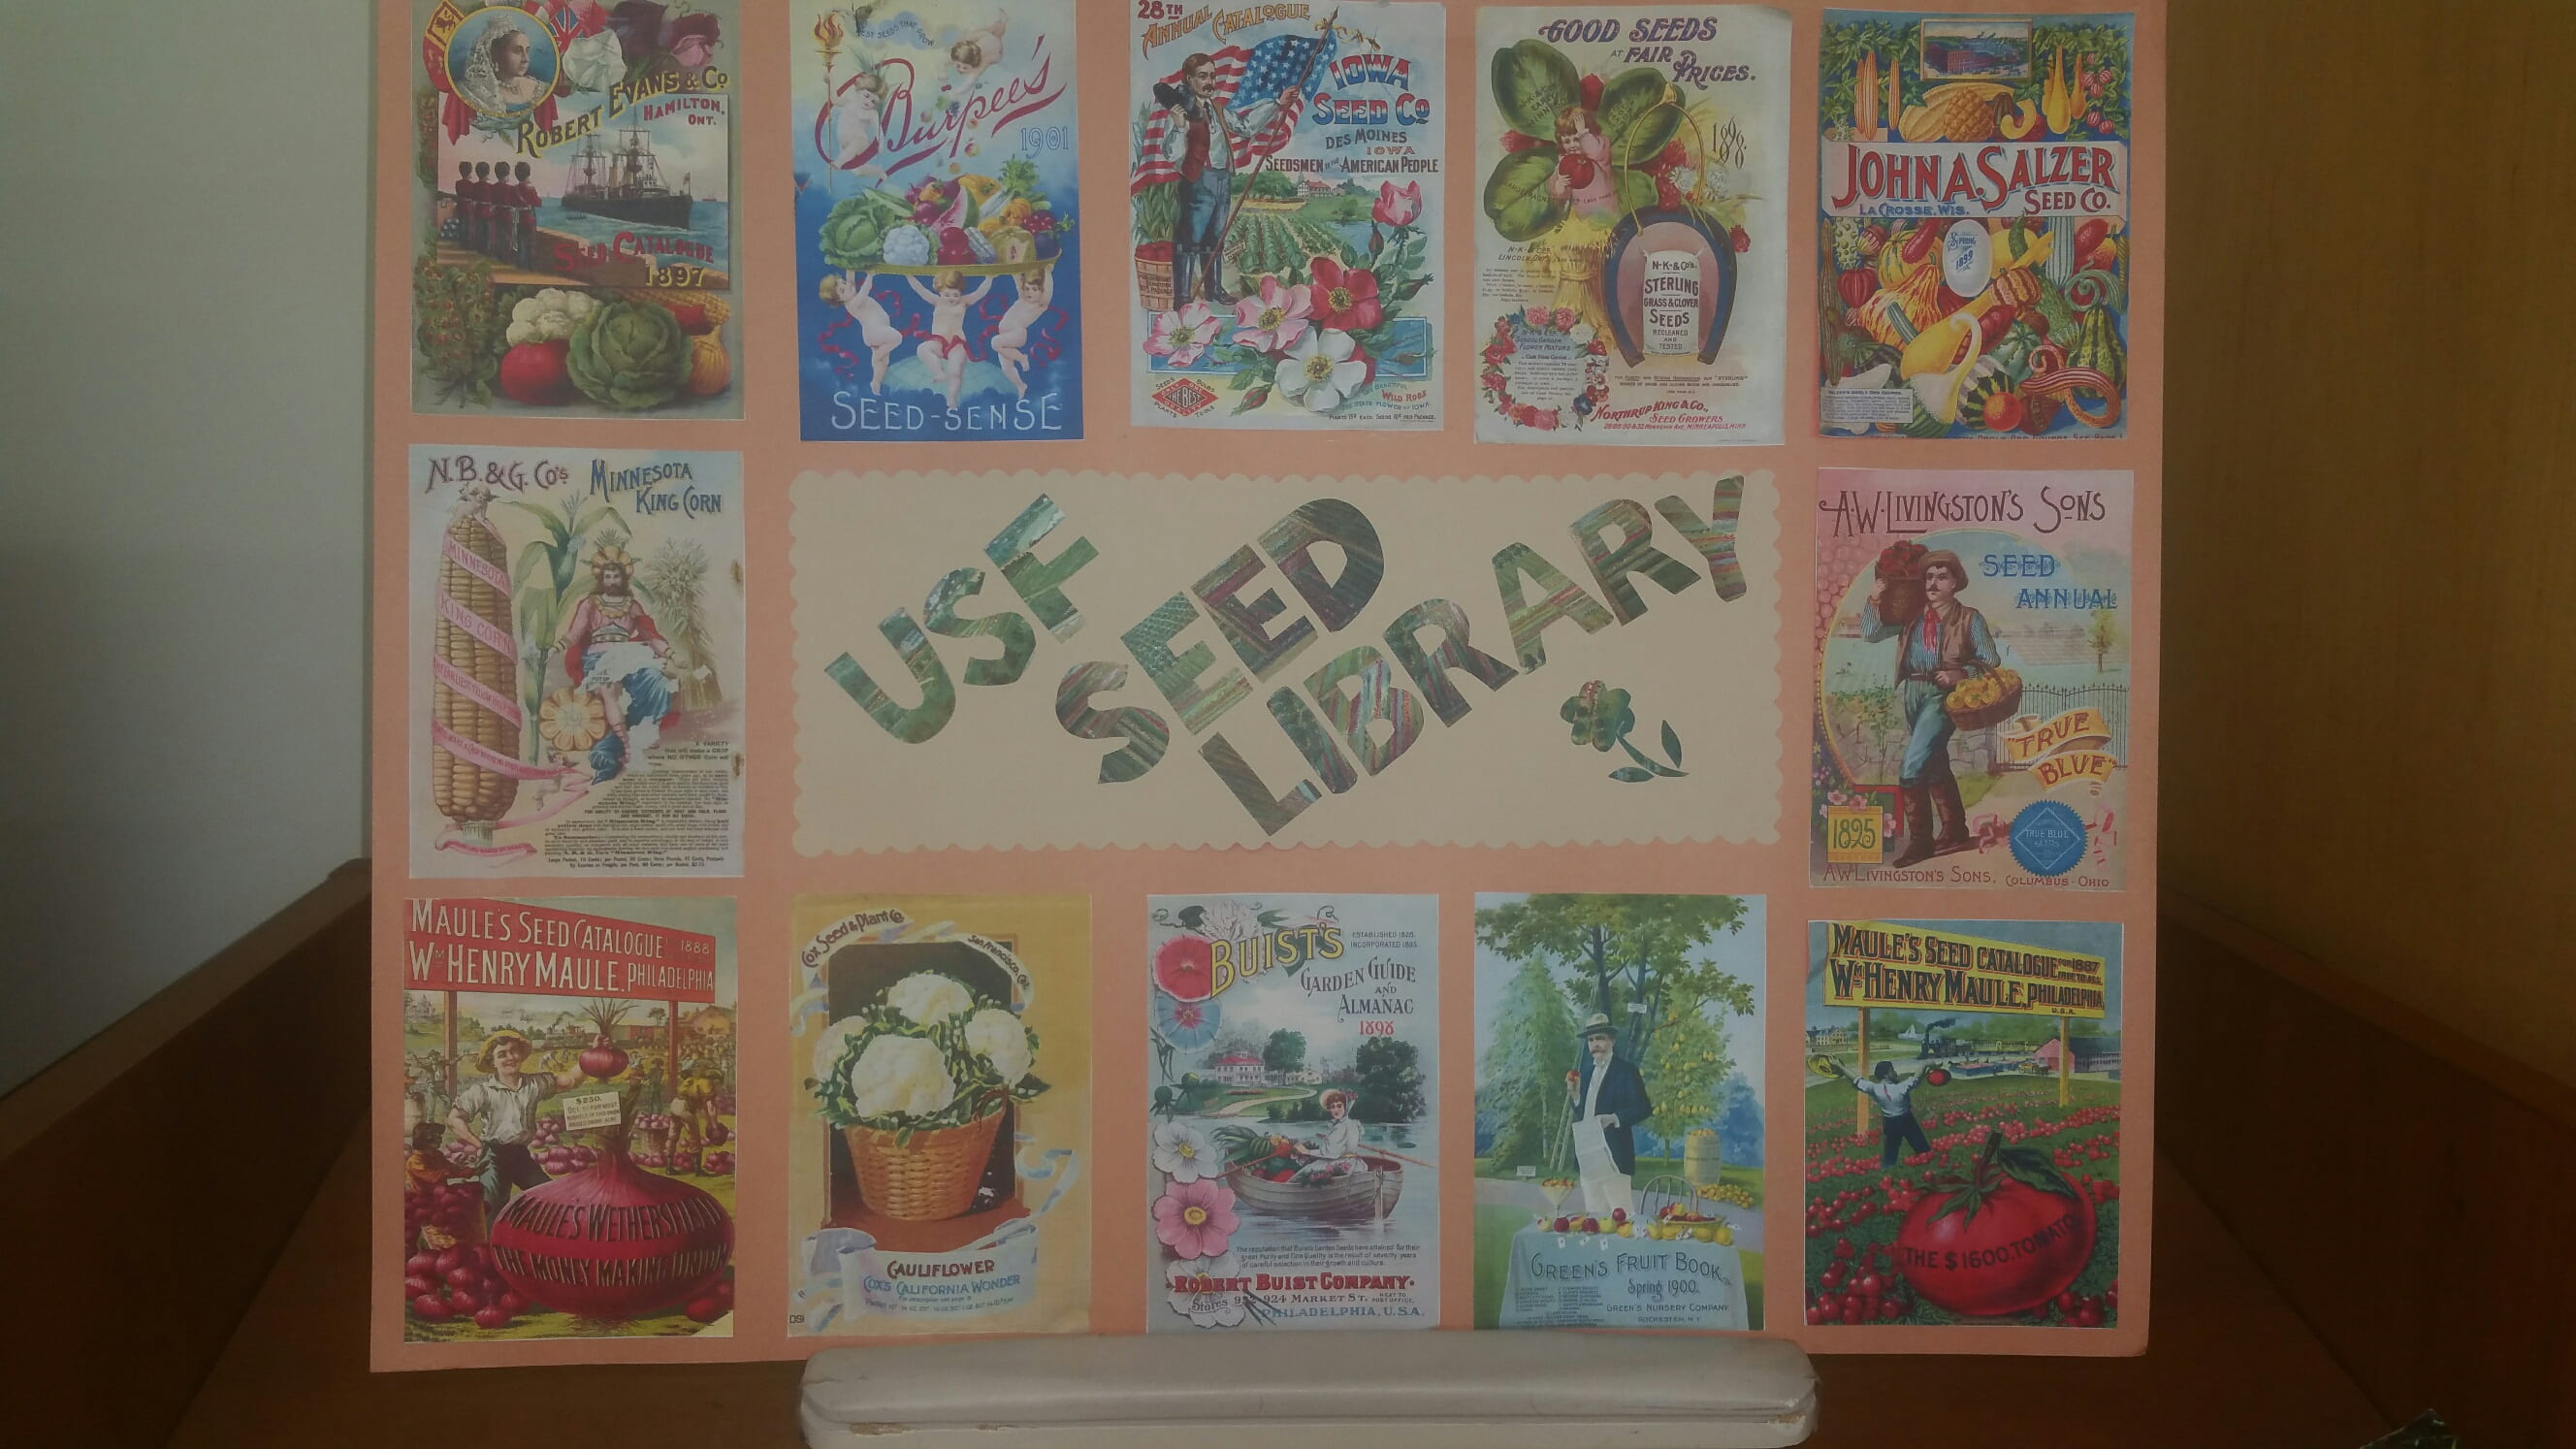 USF Seed Library